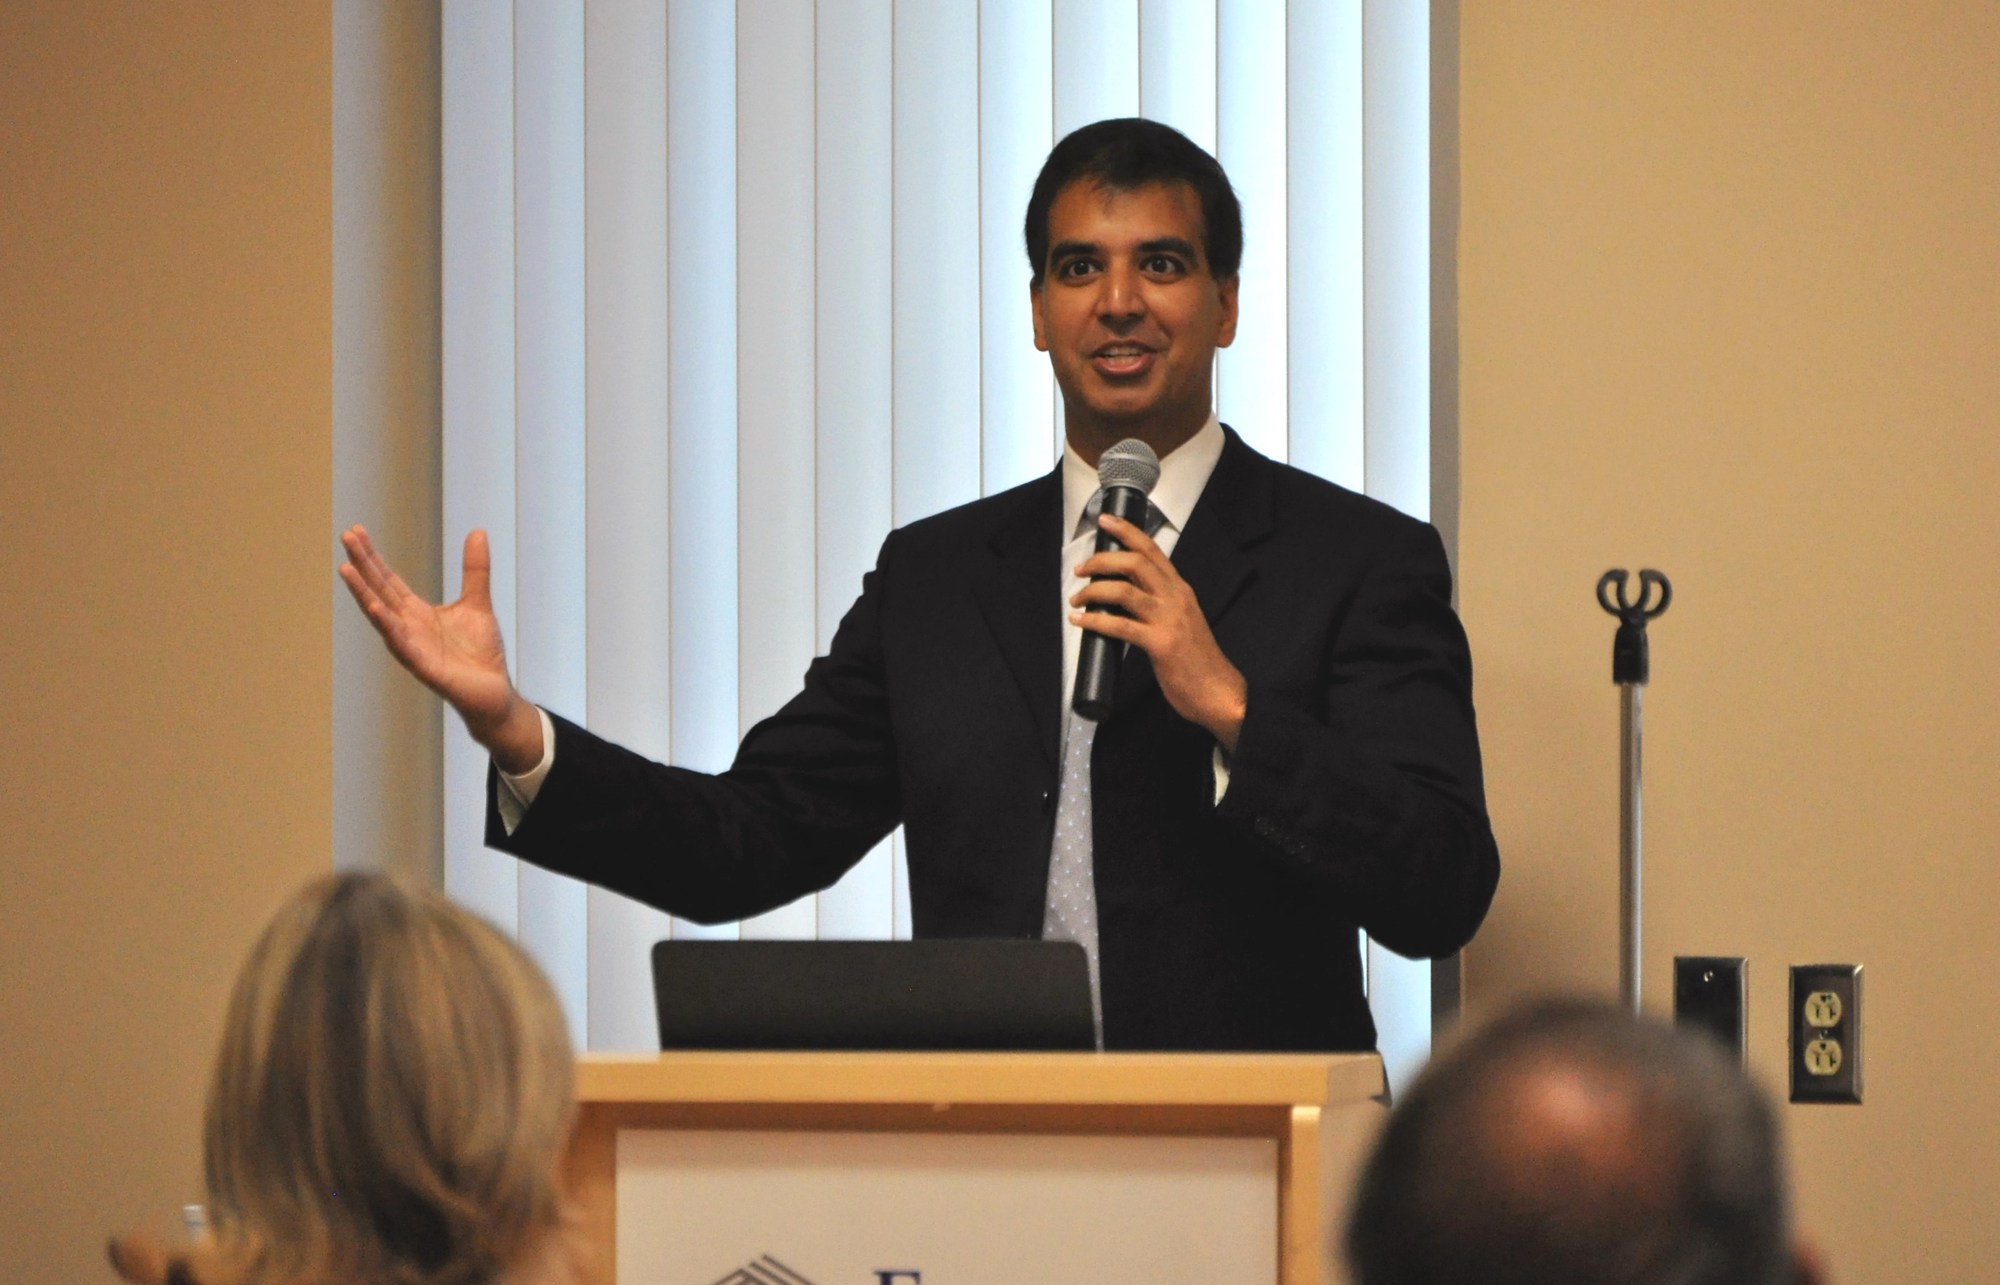 Dr. Amit Nanavati speaks to the community about peripheral artery disease (PAD). Photo courtesy of Lindsay Cashio